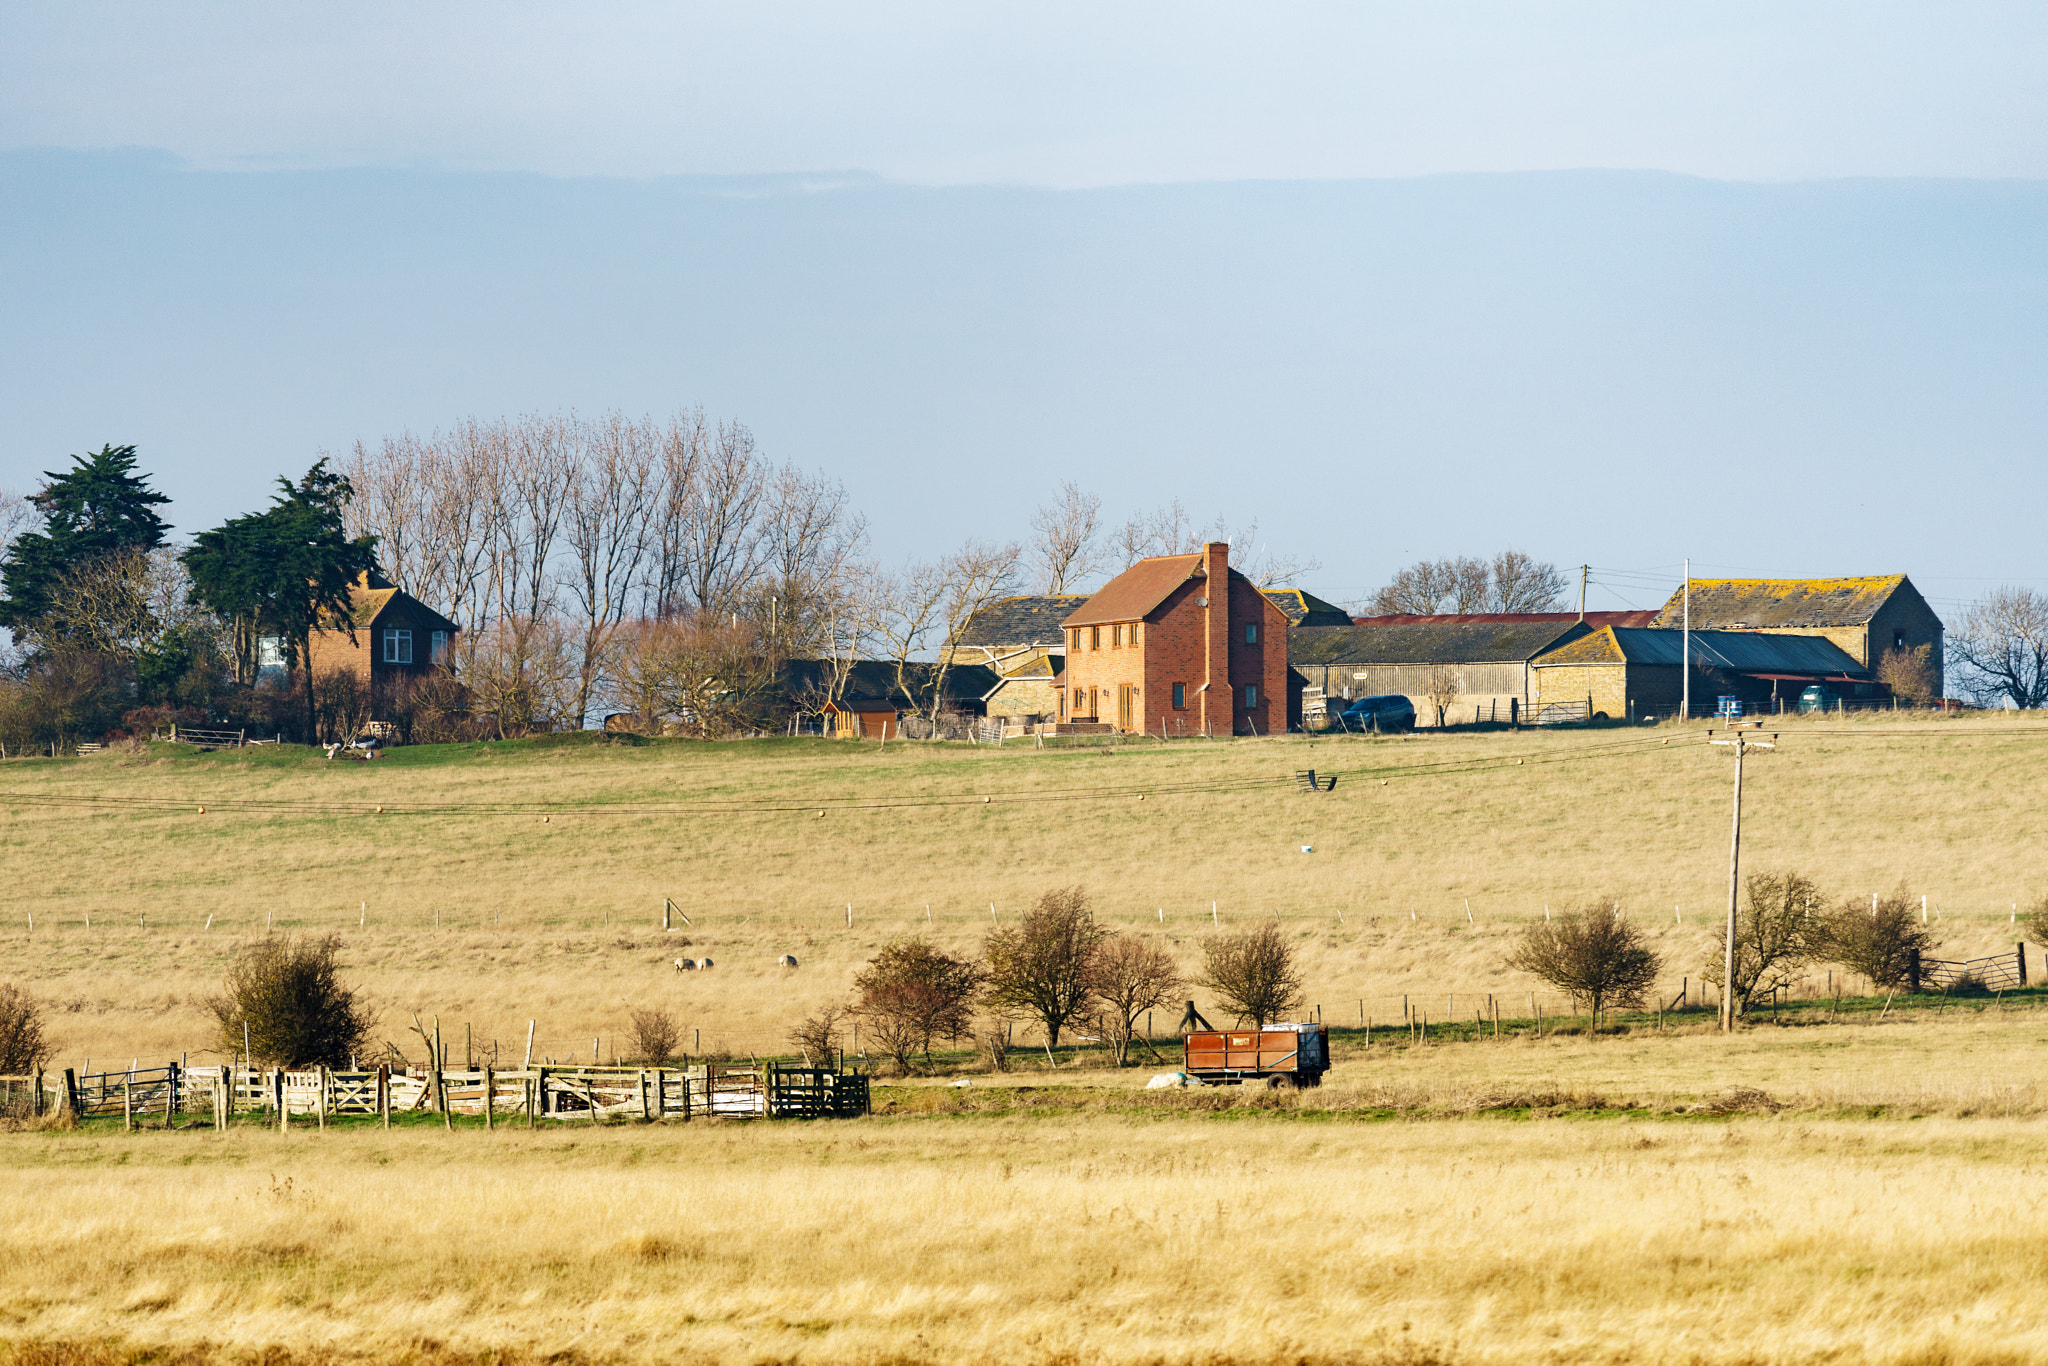 Sony a7 II sample photo. View of a farm on harty island in kent photography